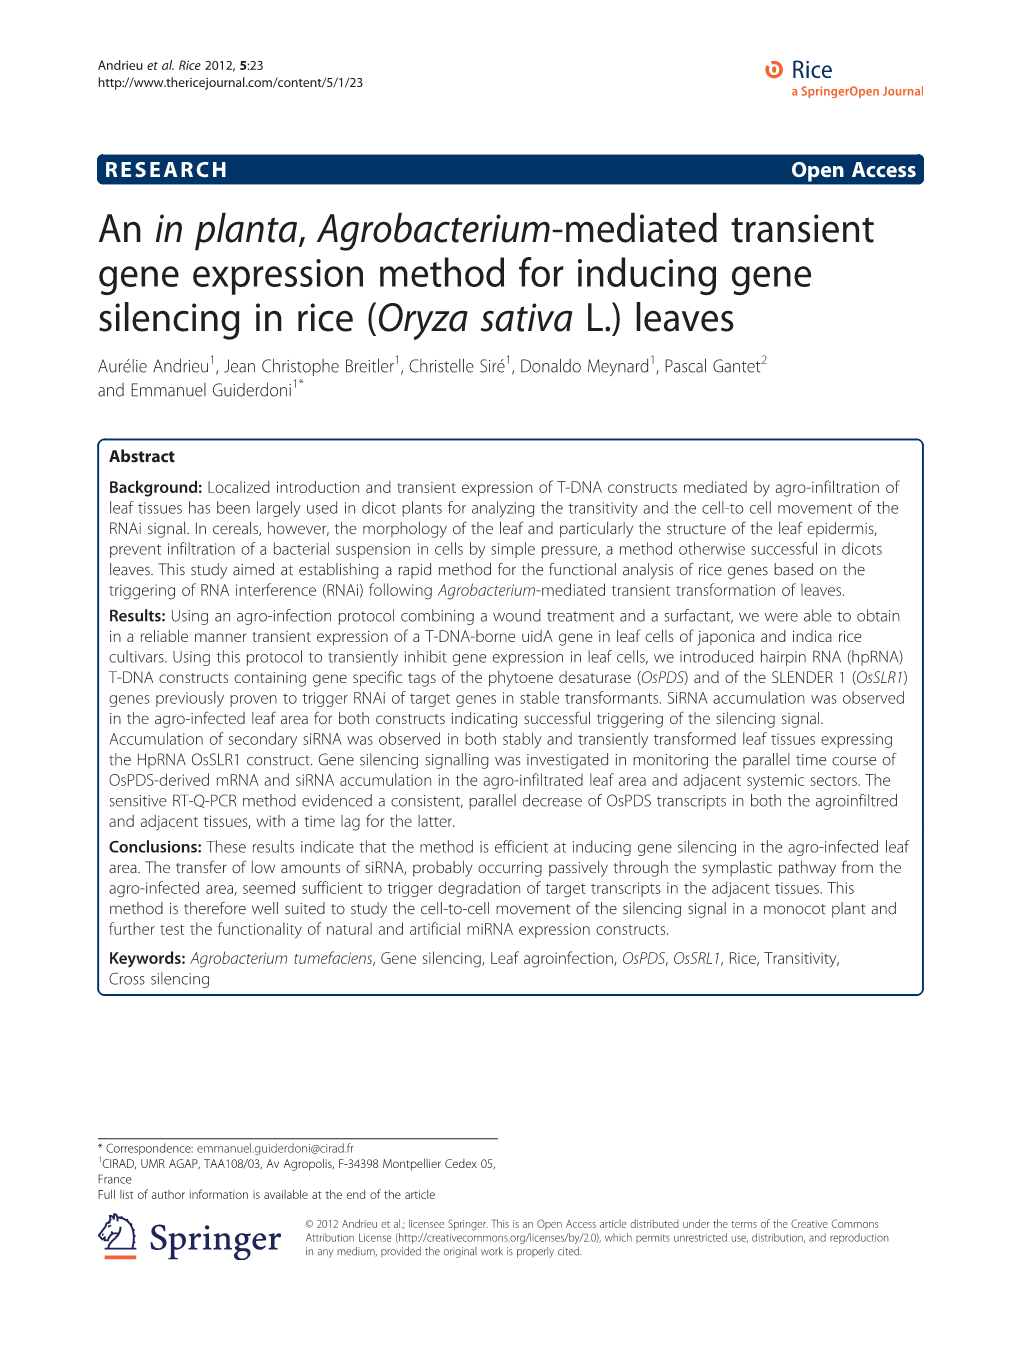 An in Planta, Agrobacterium-Mediated Transient Gene Expression